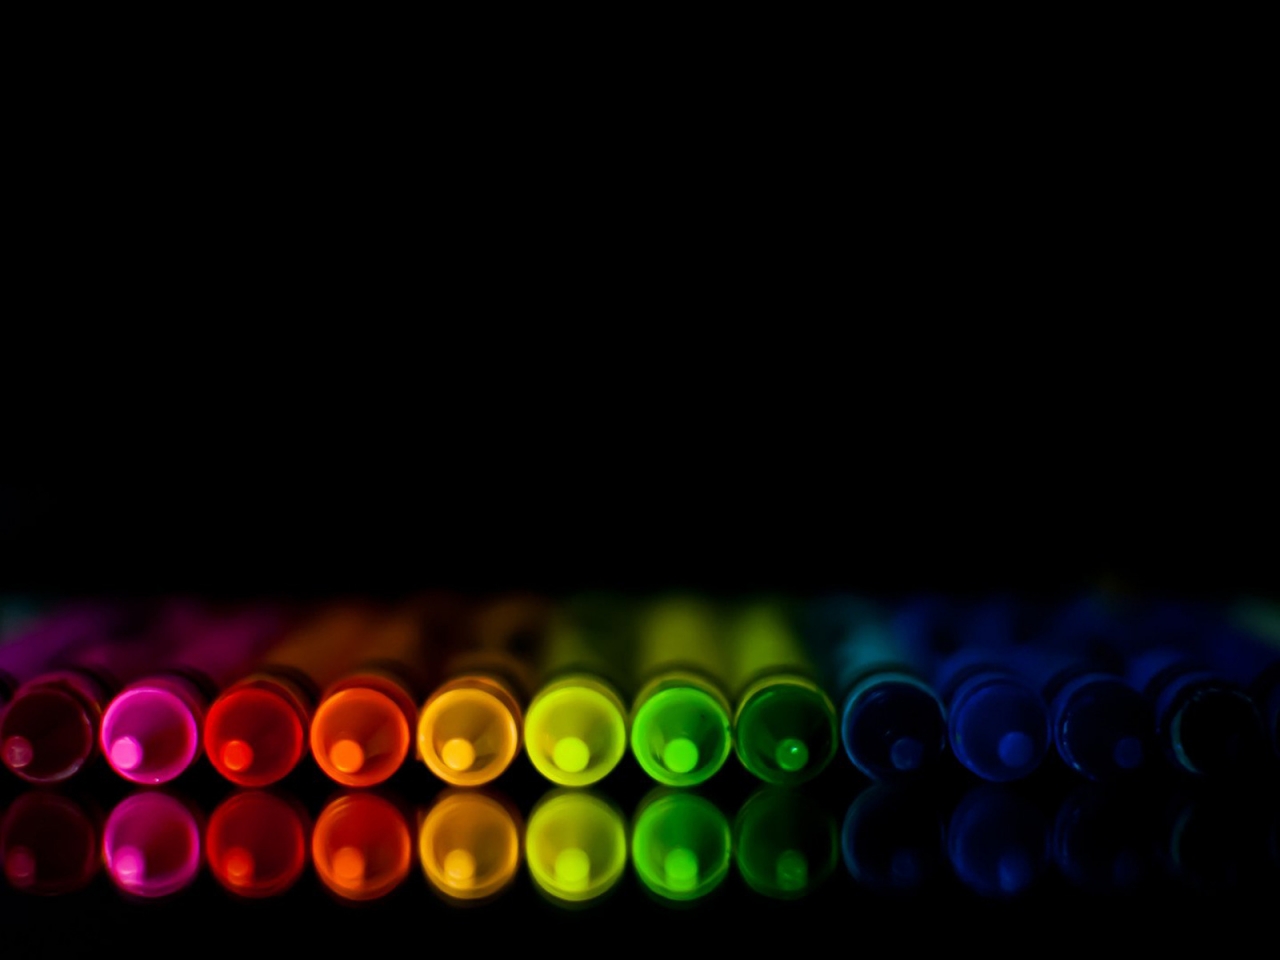 Crayons for 1280 x 960 resolution